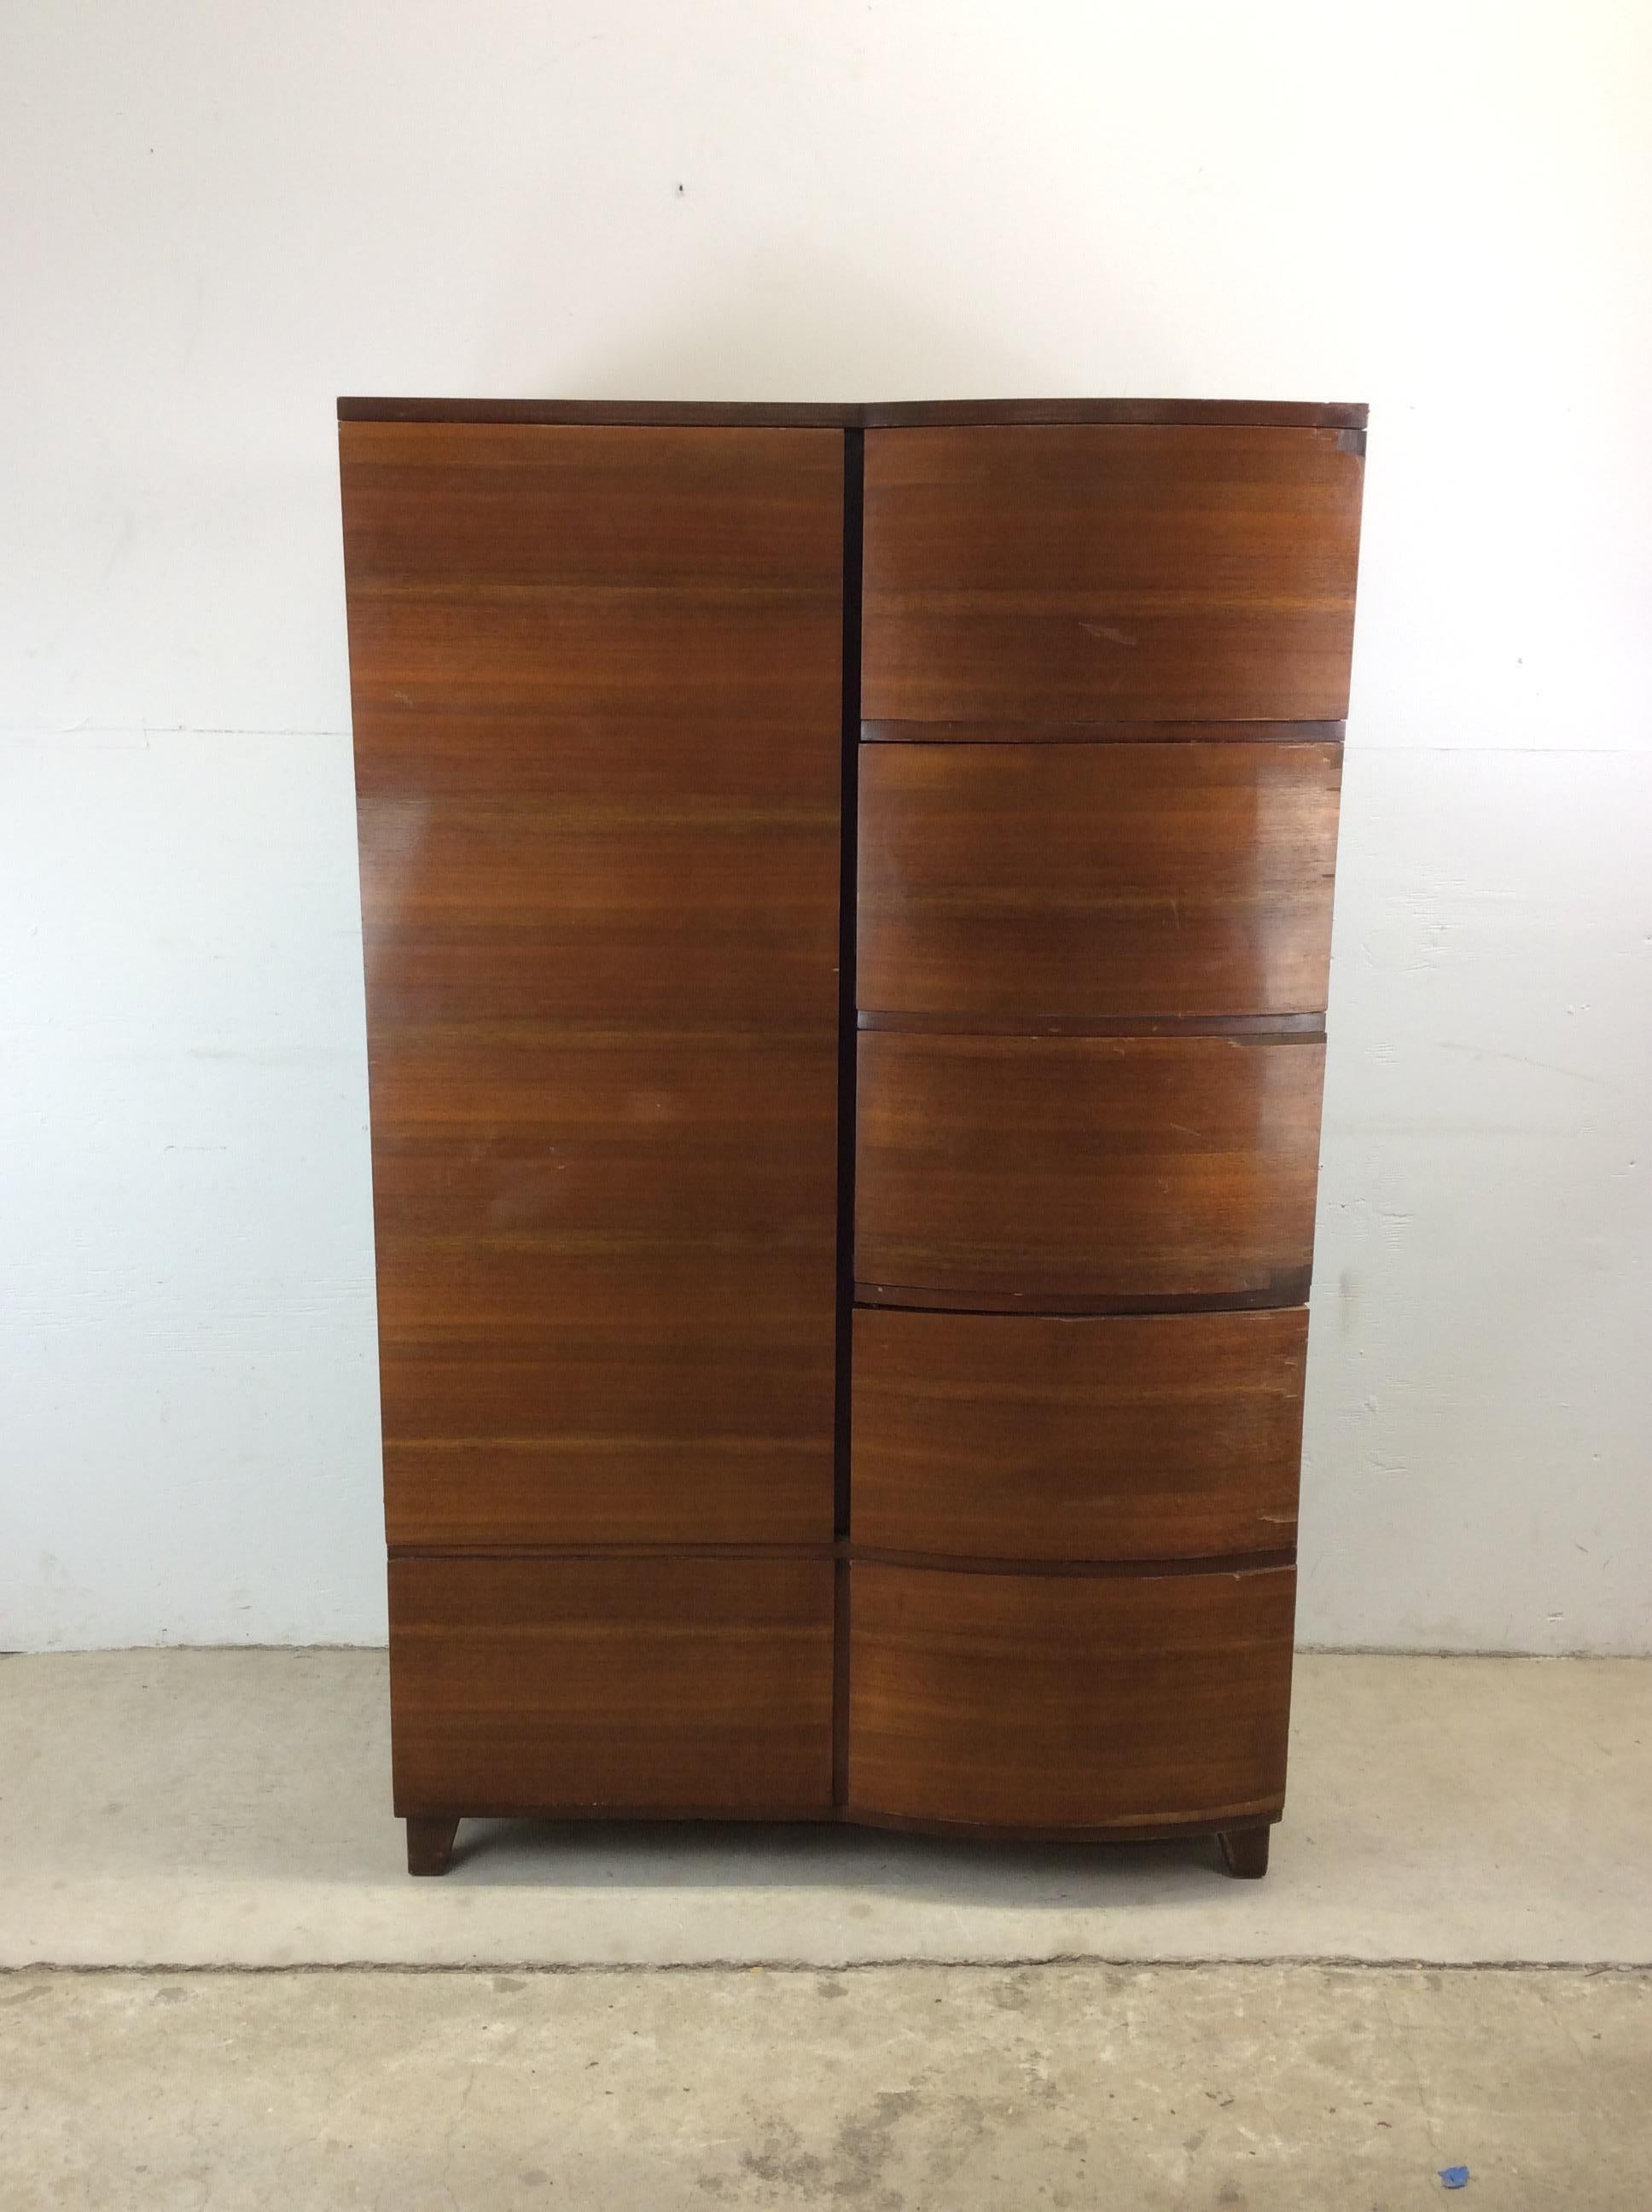 American Art Deco Cedar Lined Armoire with 4 Drawers For Sale